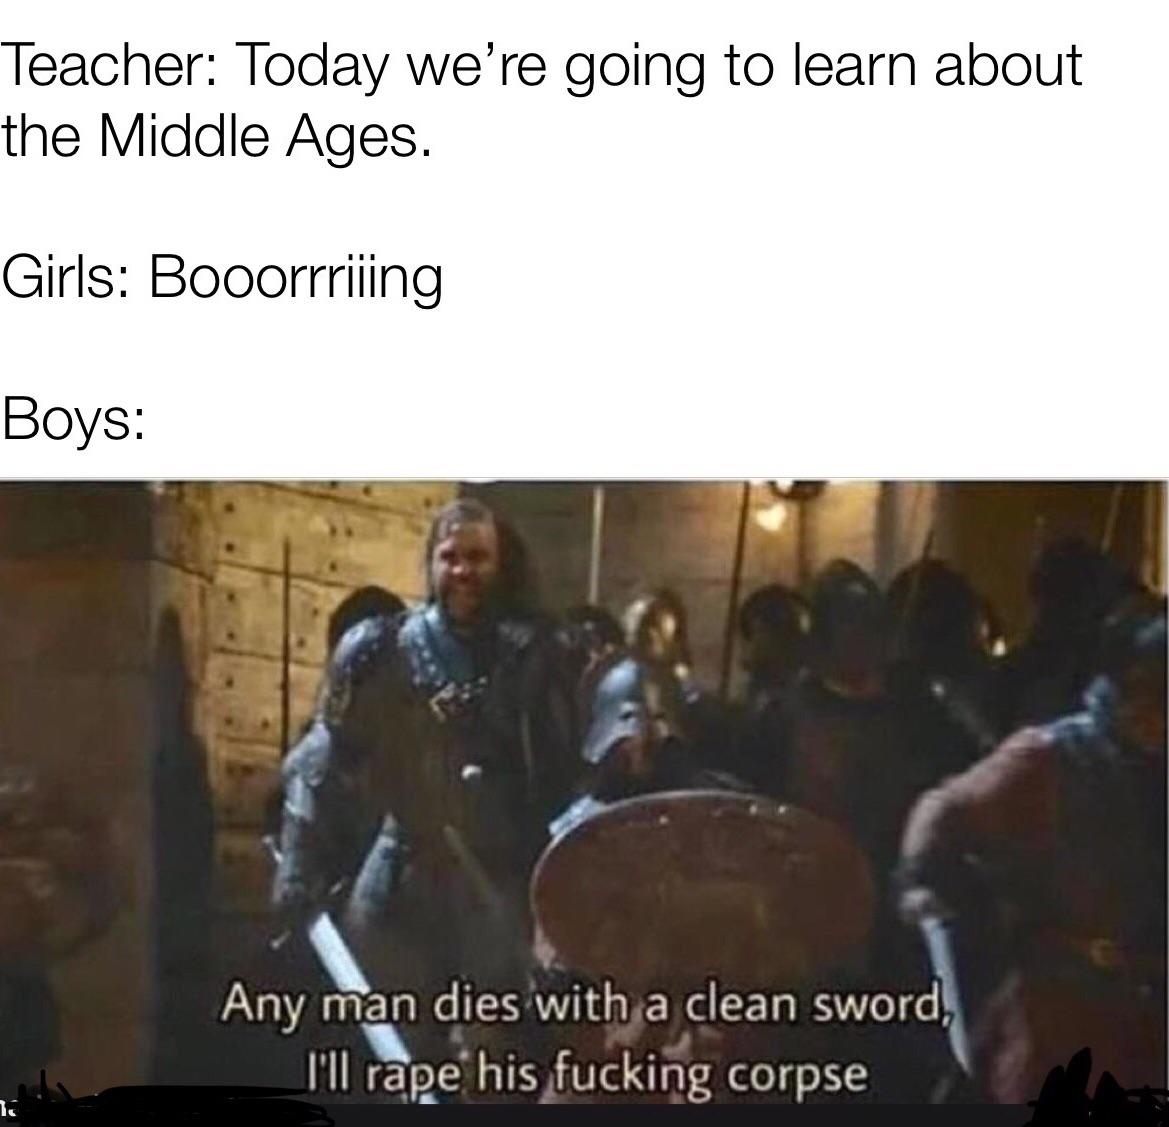 Dank Meme dank-memes cute text: Teacher: Today we're going to learn about the Middle Ages. Girls: Booorrriiing Boys: Any man dies:witlya clean sword, I'll r42éhisfuckirpg corpse 